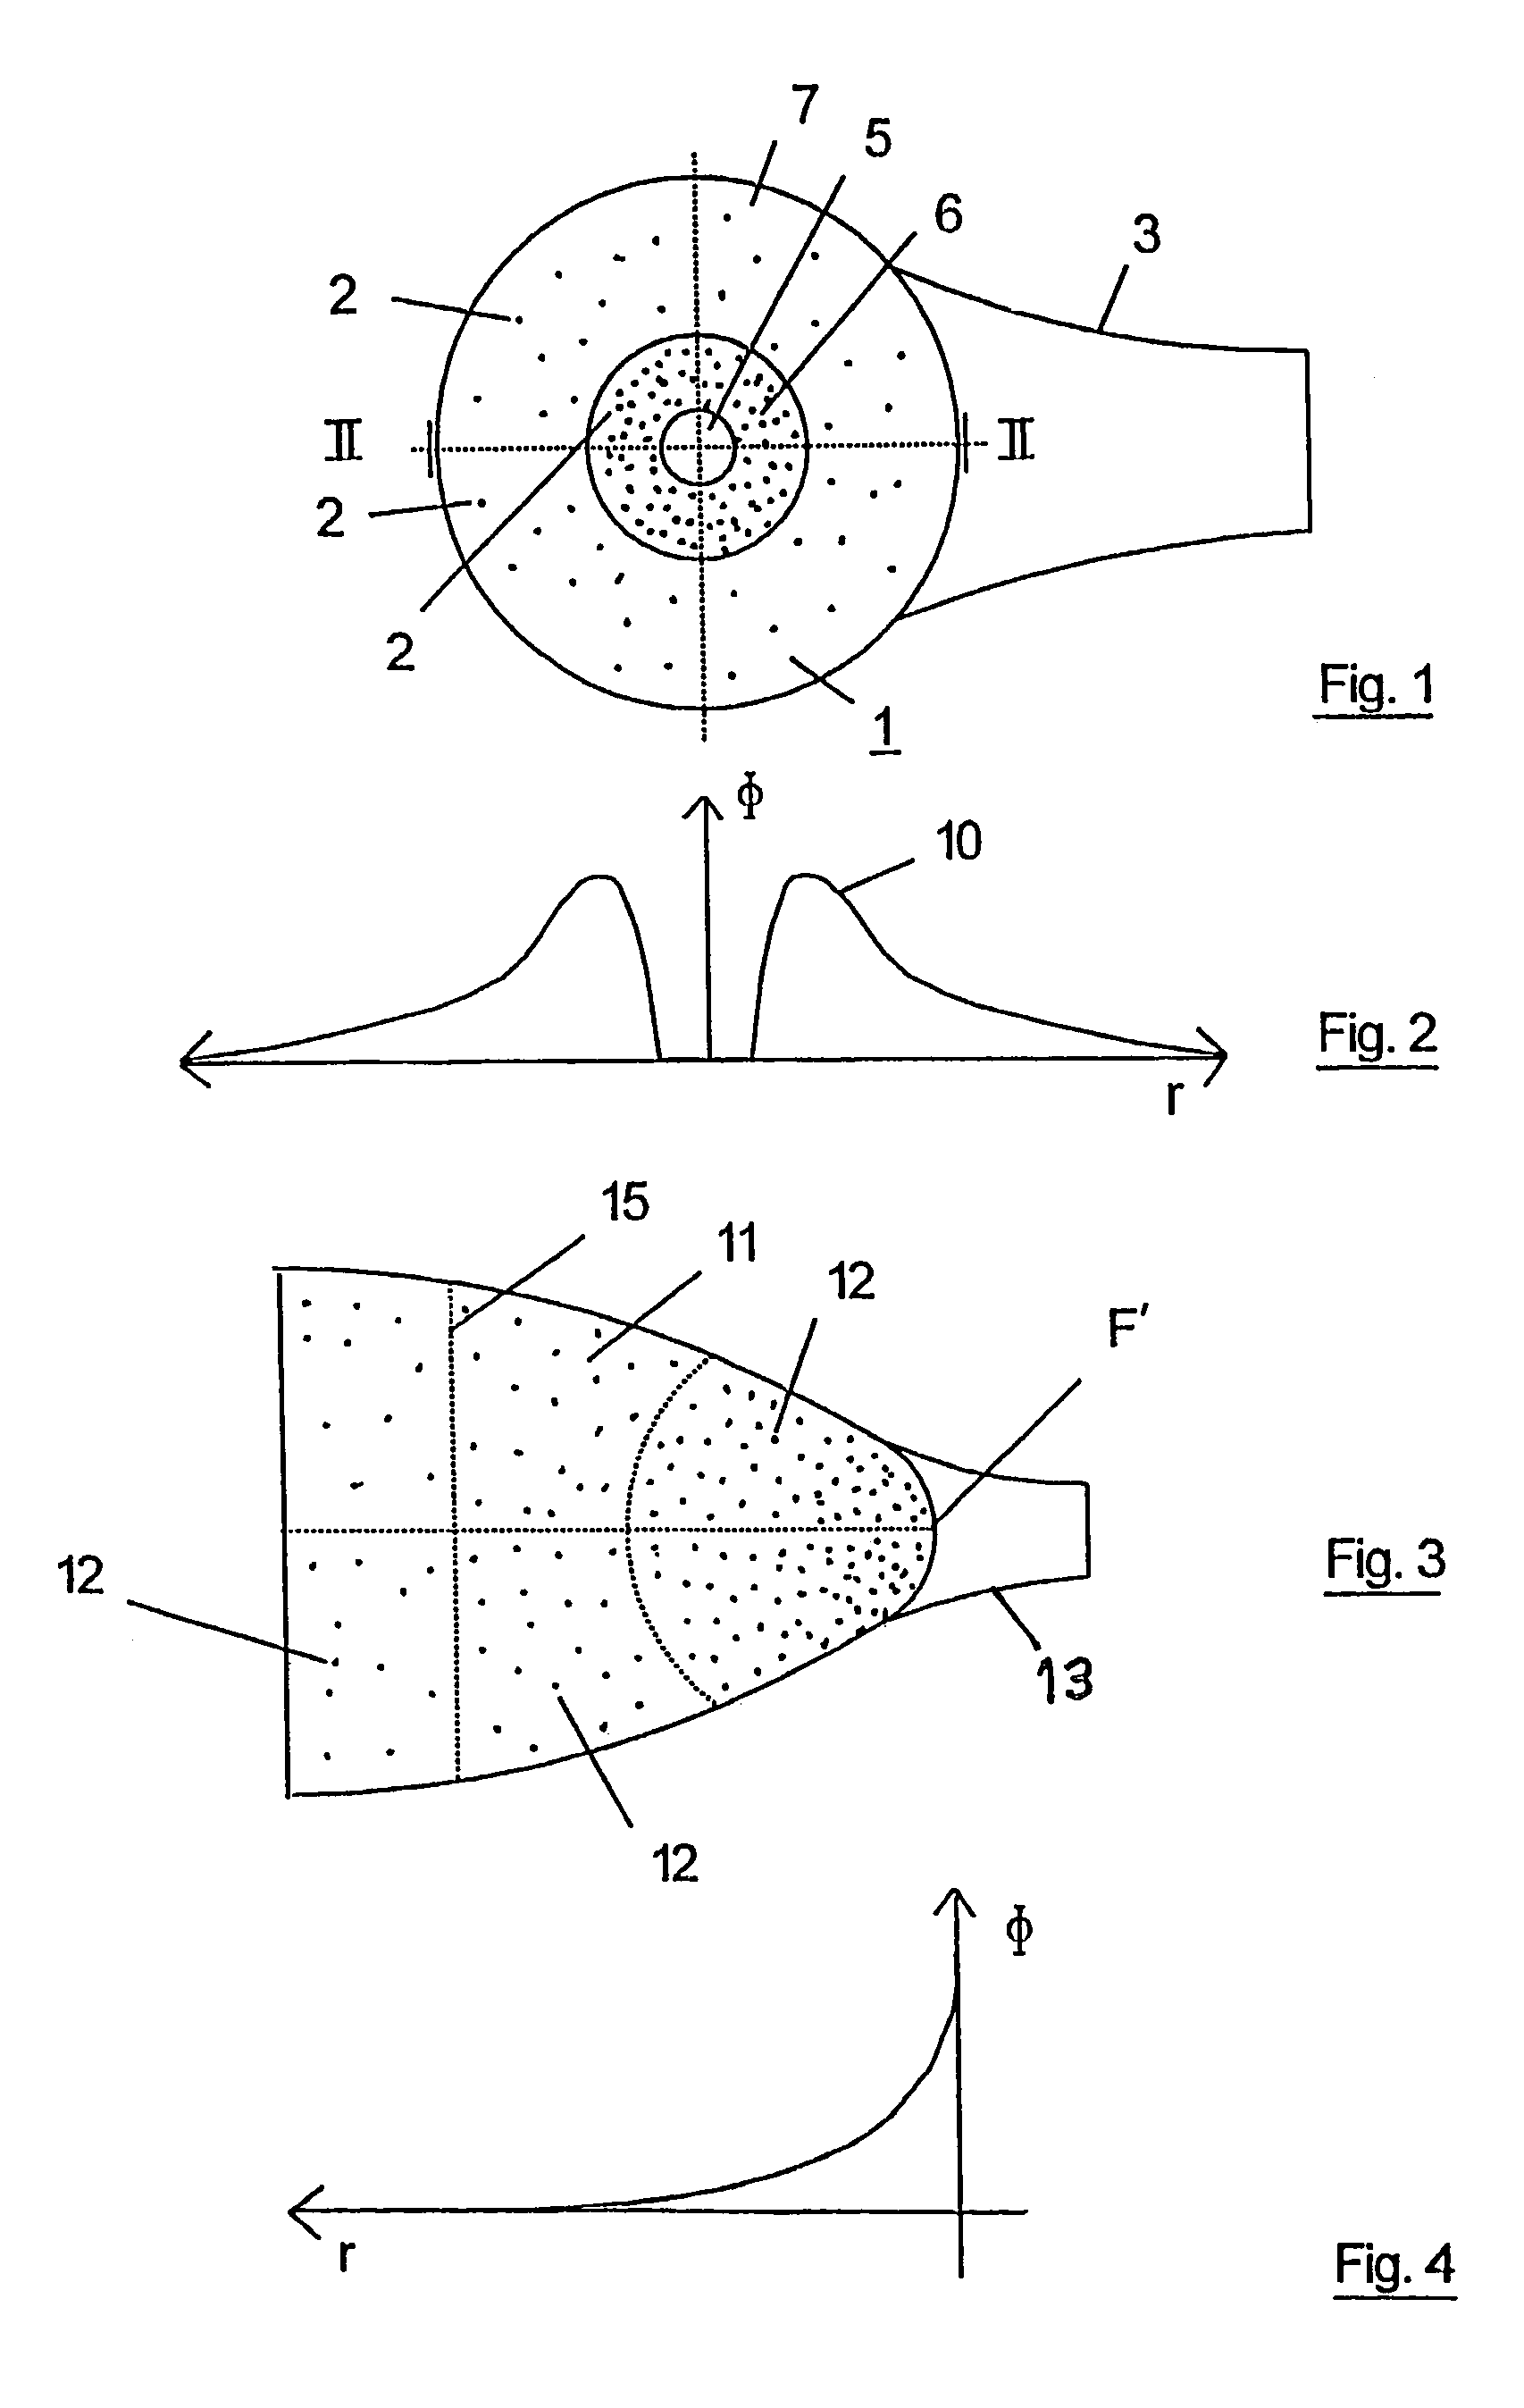 Microcontact structure for implantation in a mammal, especially a human being